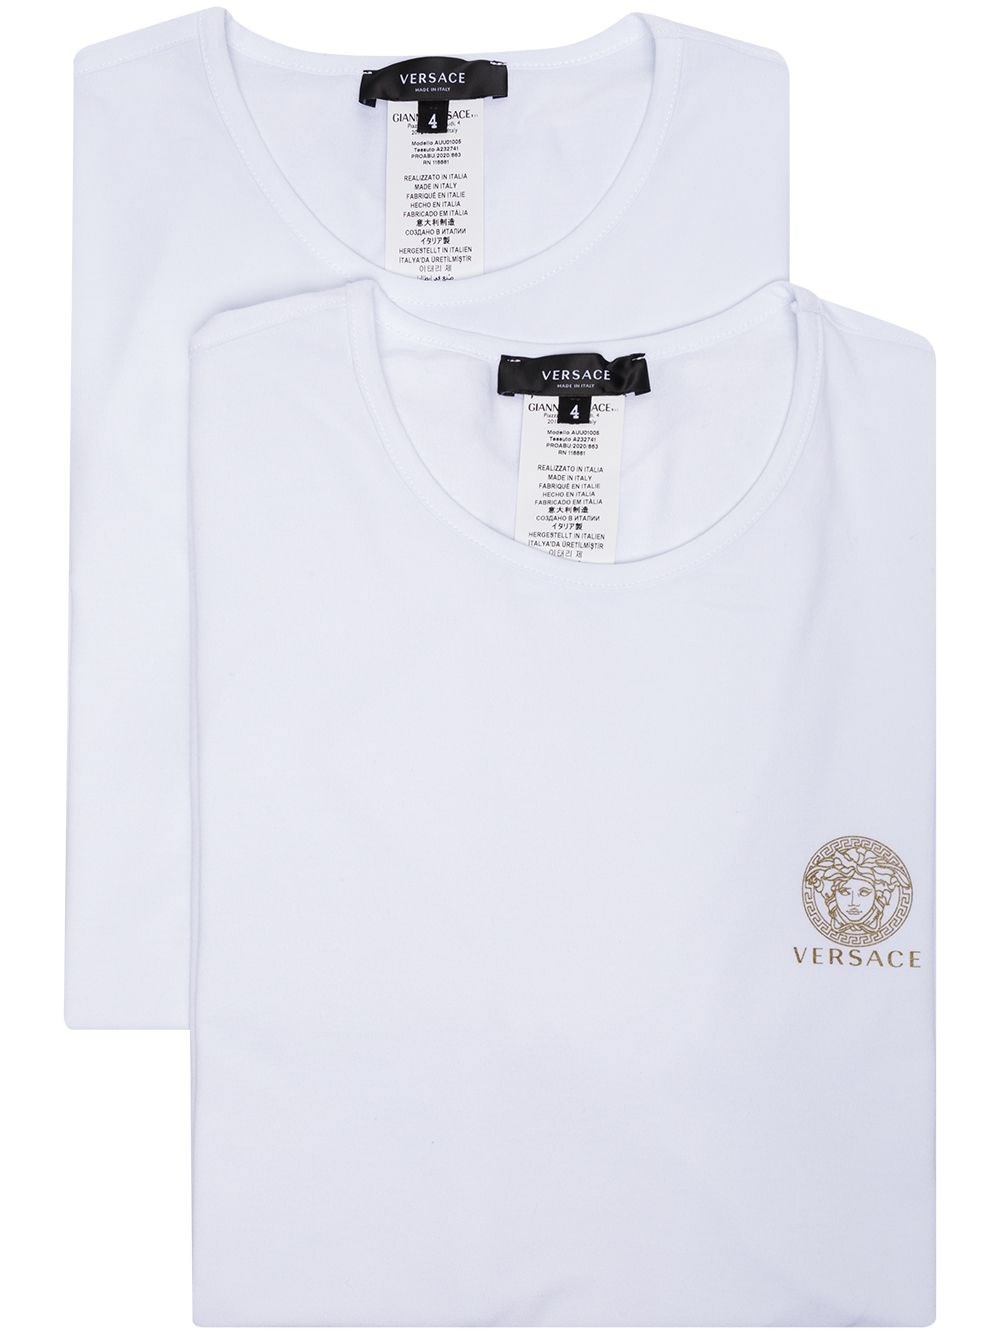 versace Medusa Crest set of two T-shirts available on